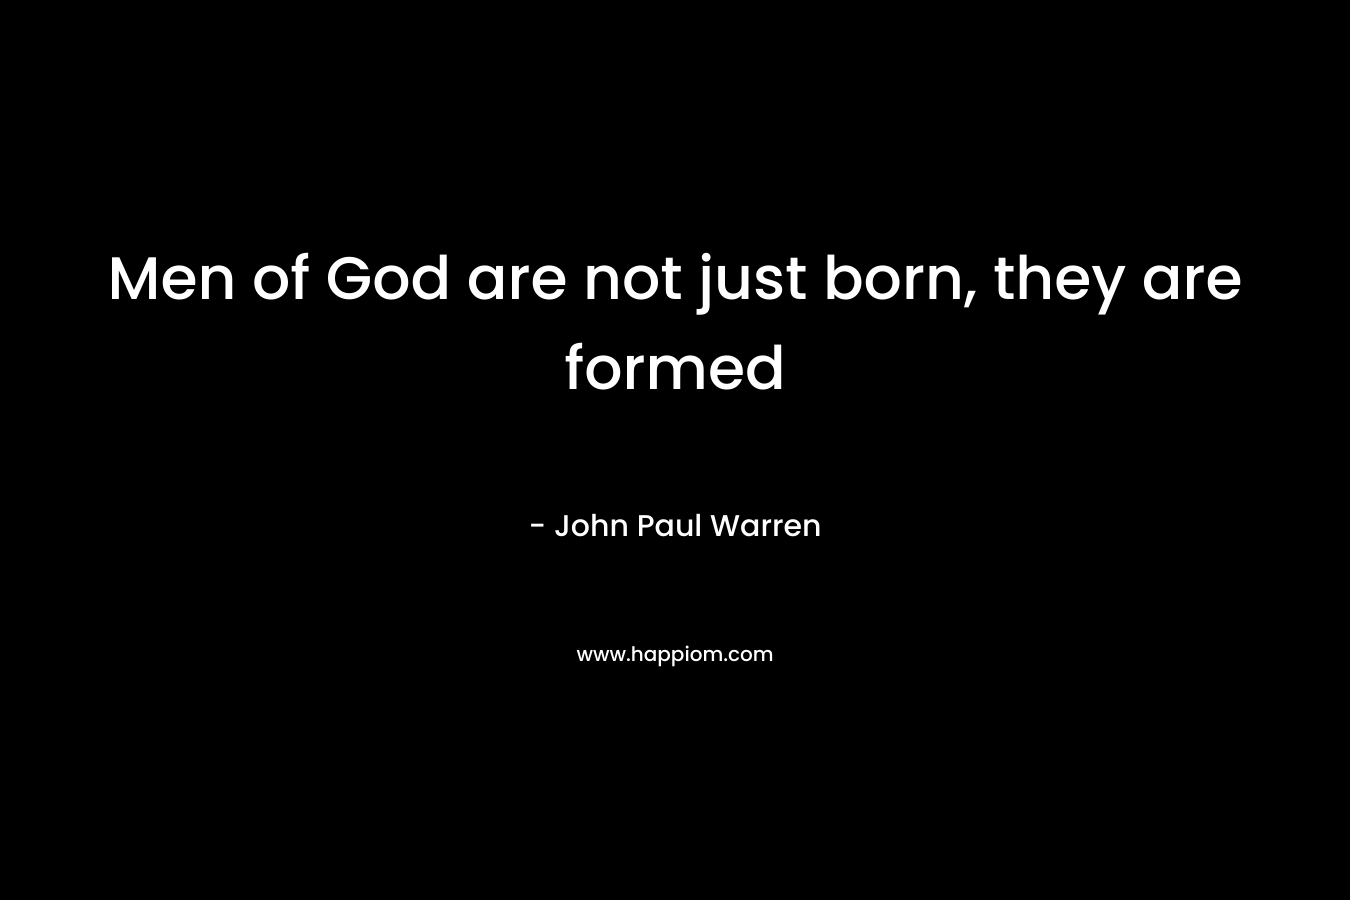 Men of God are not just born, they are formed